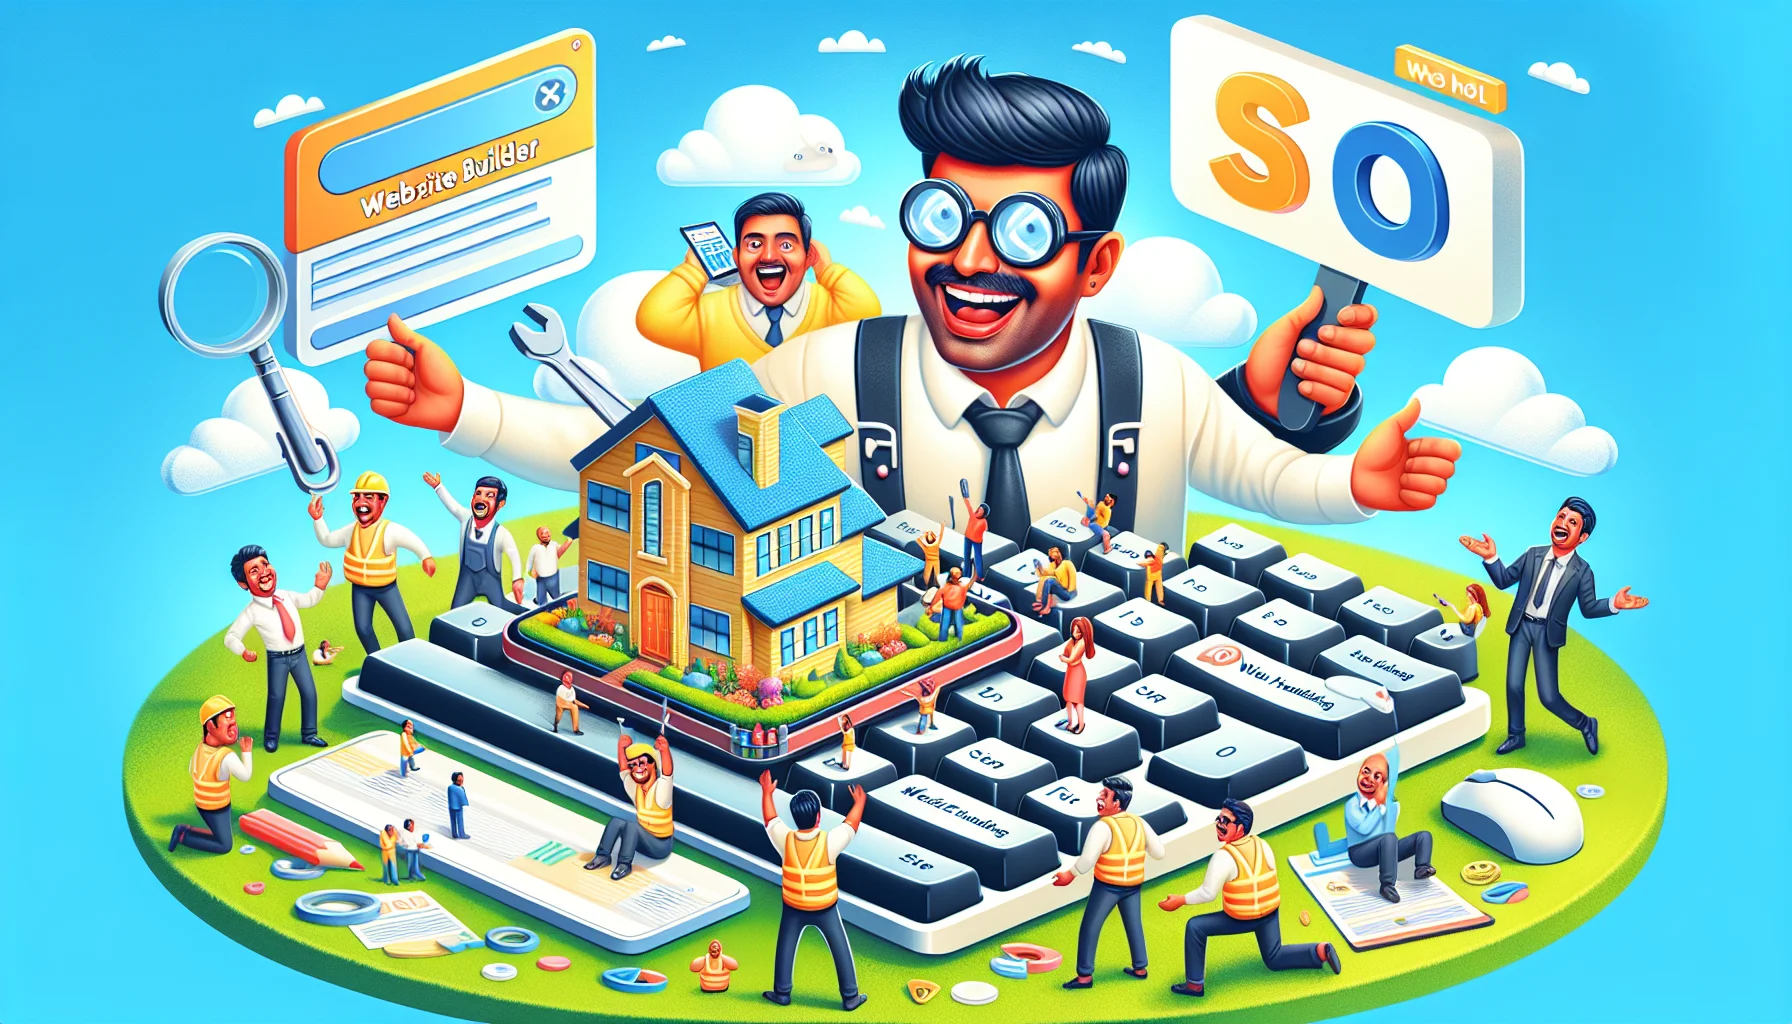 Create a humorous and detailed image that illustrates the concept of SEO Website Builder. Picture a cartoonish South Asian man, with a broad smile on his face, holding a large 'SEO' toolbox. There should also be a gargantuan keyboard in the background depicting the 'Website Builder'. On the keyboard, miniature people are working together to construct a website. A banner should float above the whole scenario, carrying an enticing offer for 'Web Hosting', perhaps visualized as a cloud with a house sitting safely on top. The image should be bright, engaging, and visually explain the process of SEO and website building in a fun way.